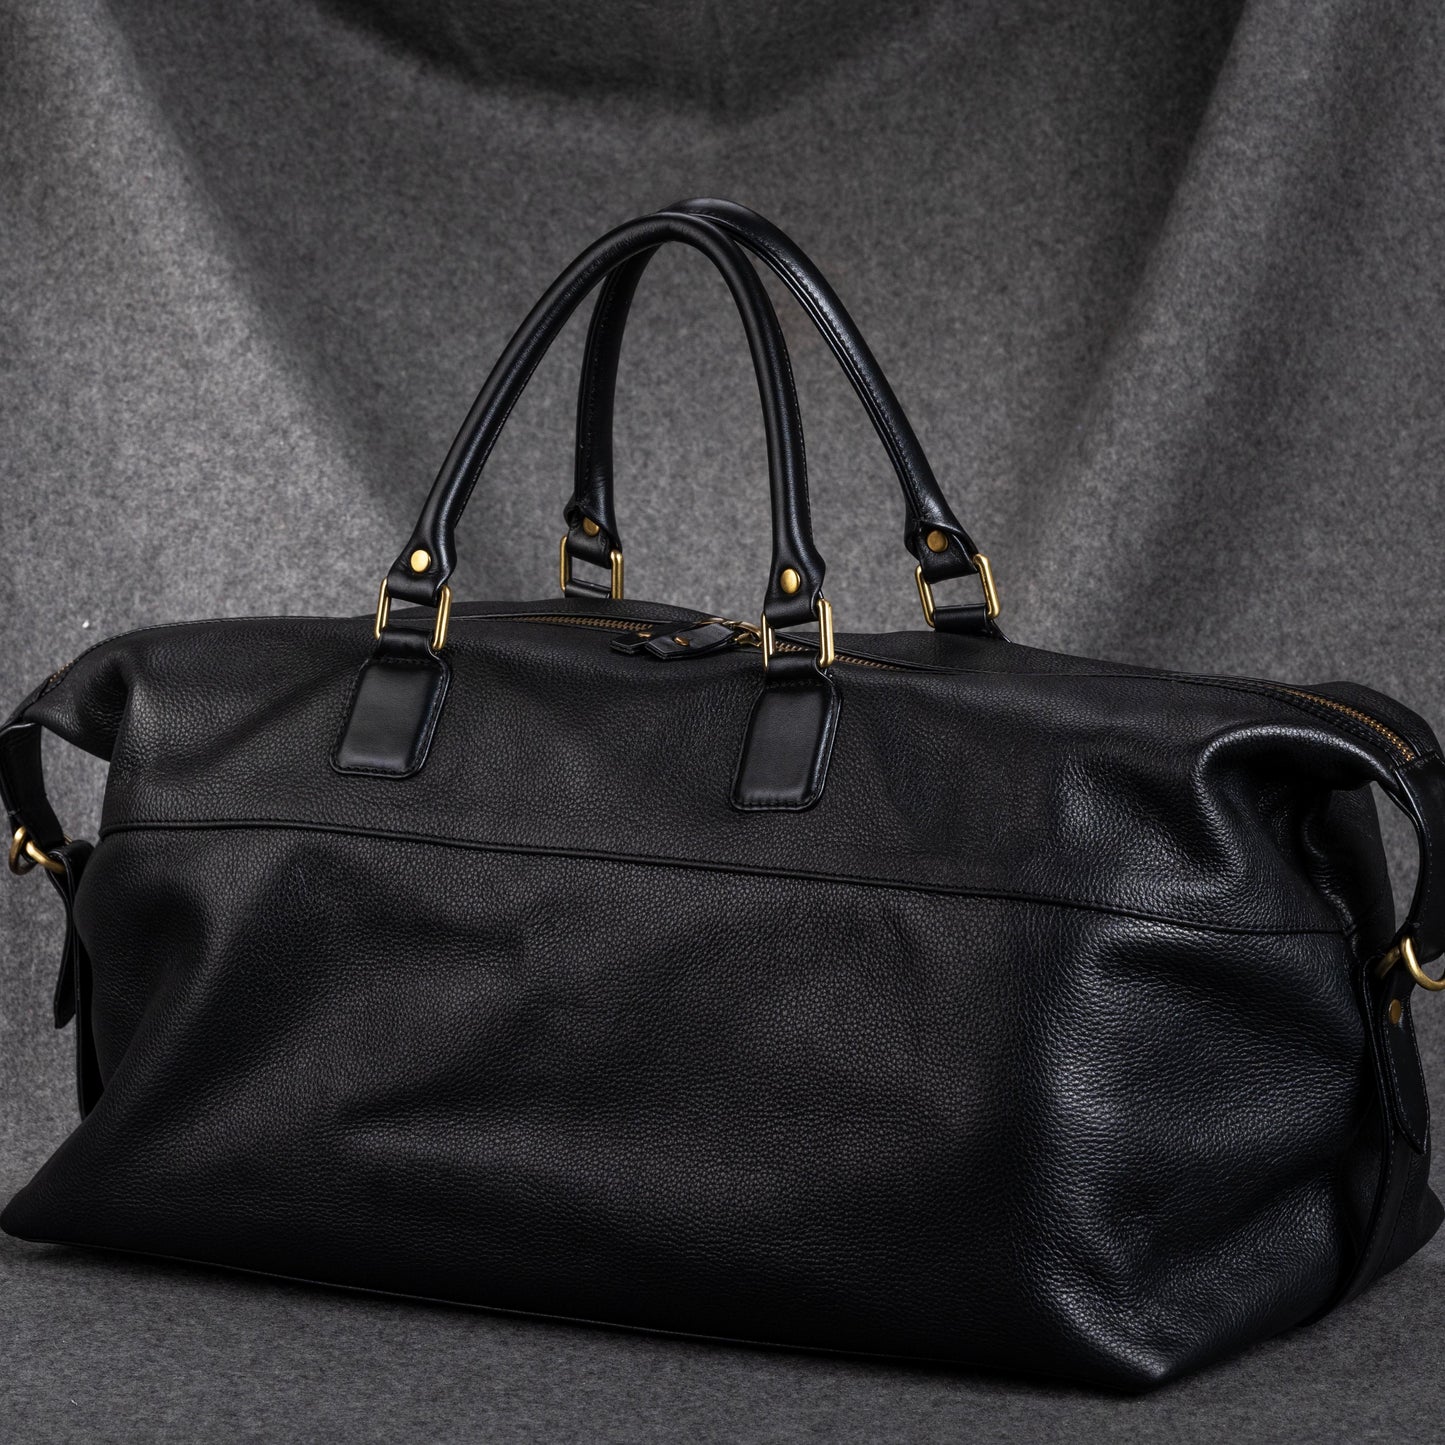 The Duffle Bag is handmade from Leather, in Black. Cabin size, can also be placed overhead bin on the aircraft